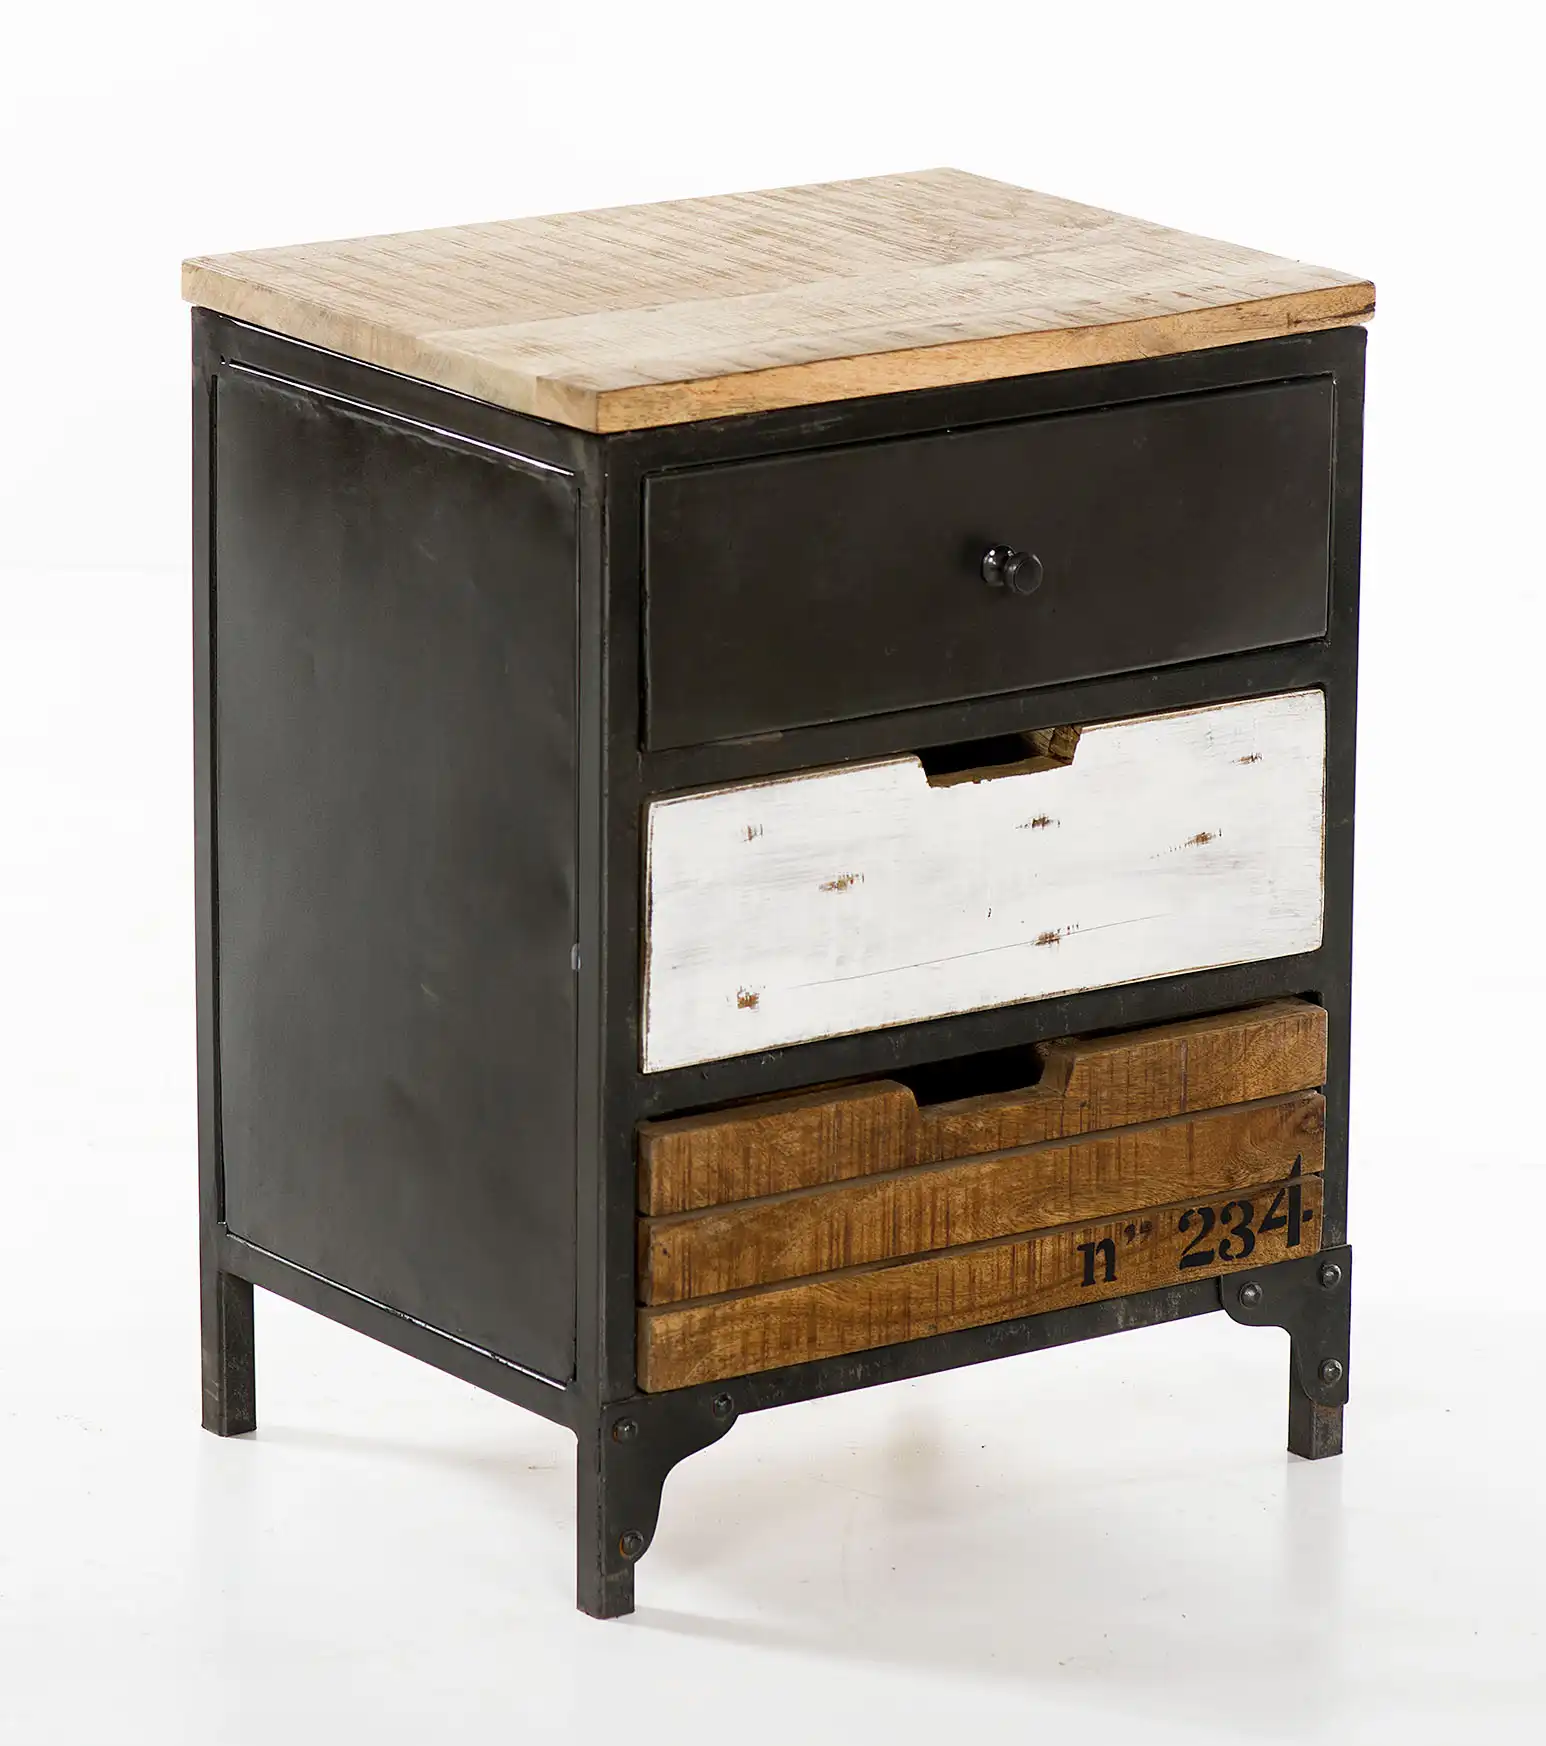 Side Table with 3 Drawers - popular handicrafts